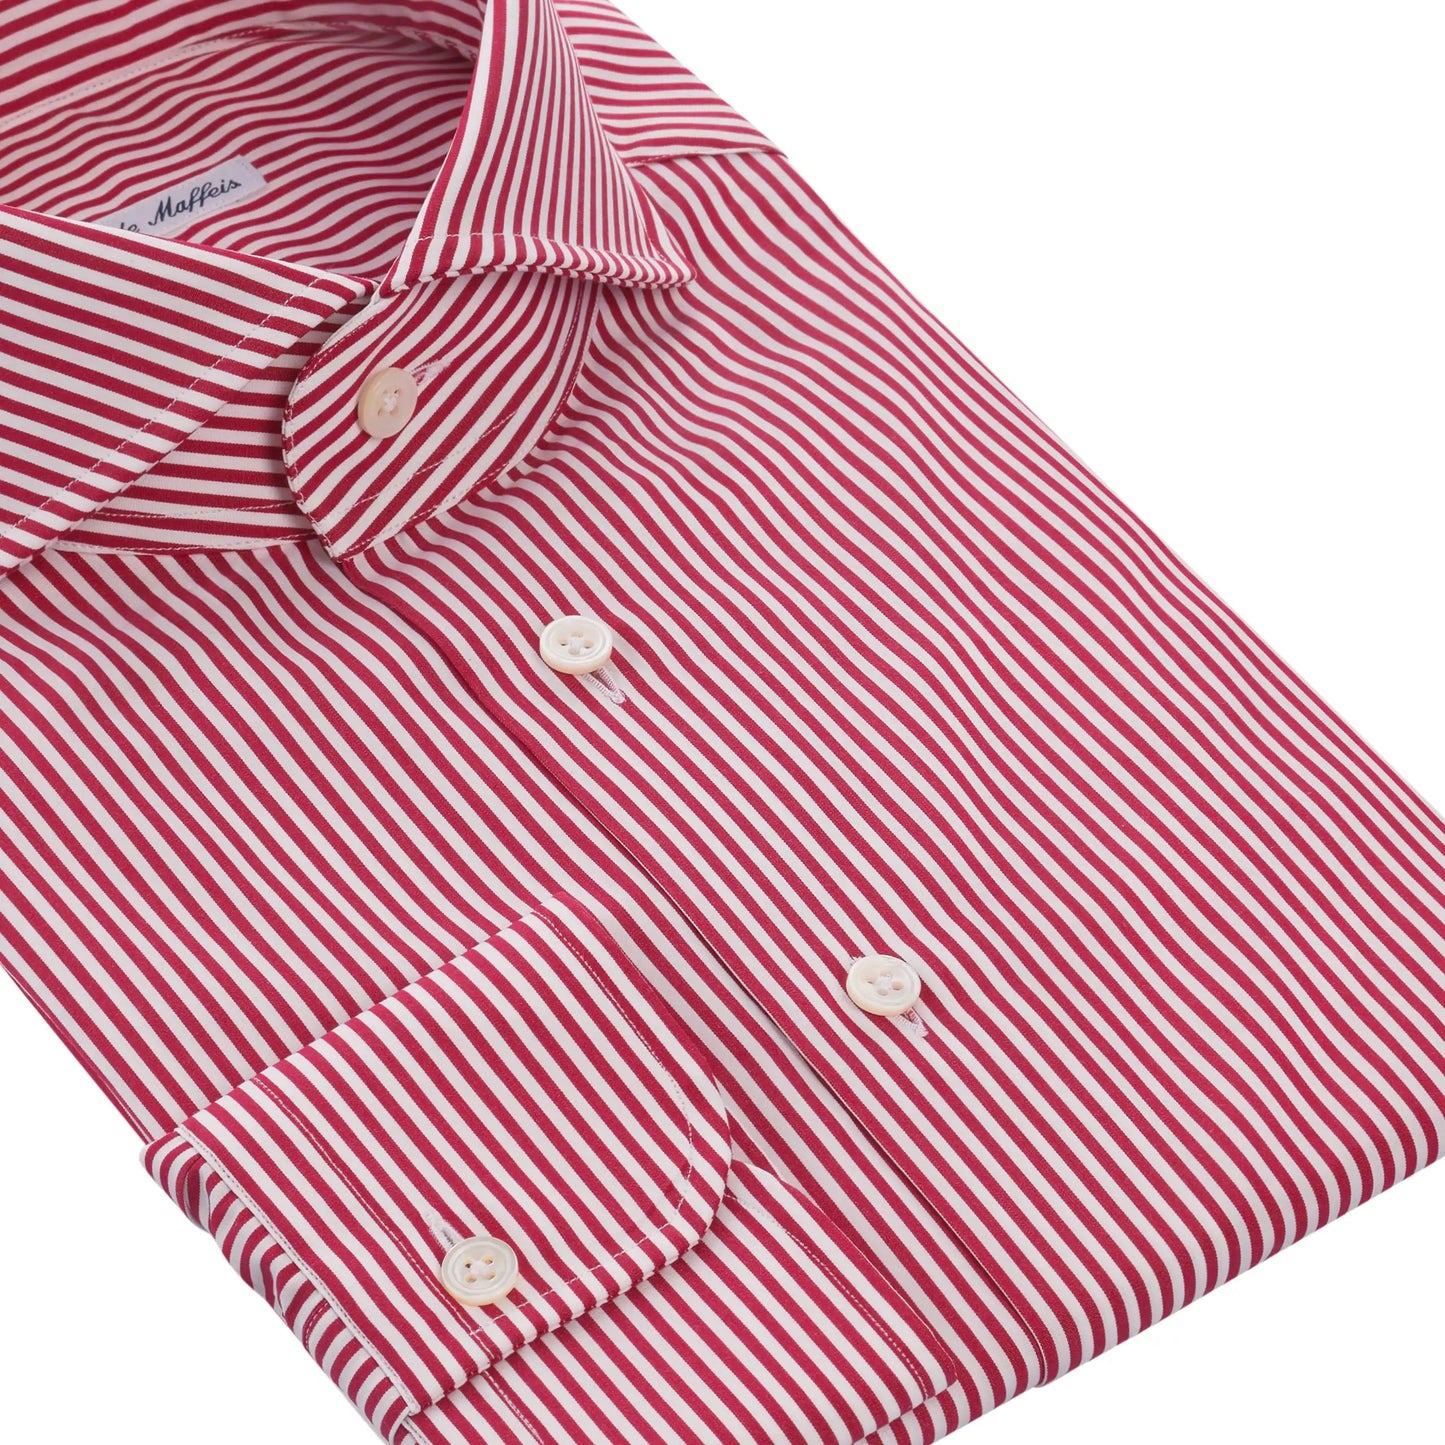 Emanuele Maffeis Striped Cotton Shirt in Red and White - SARTALE